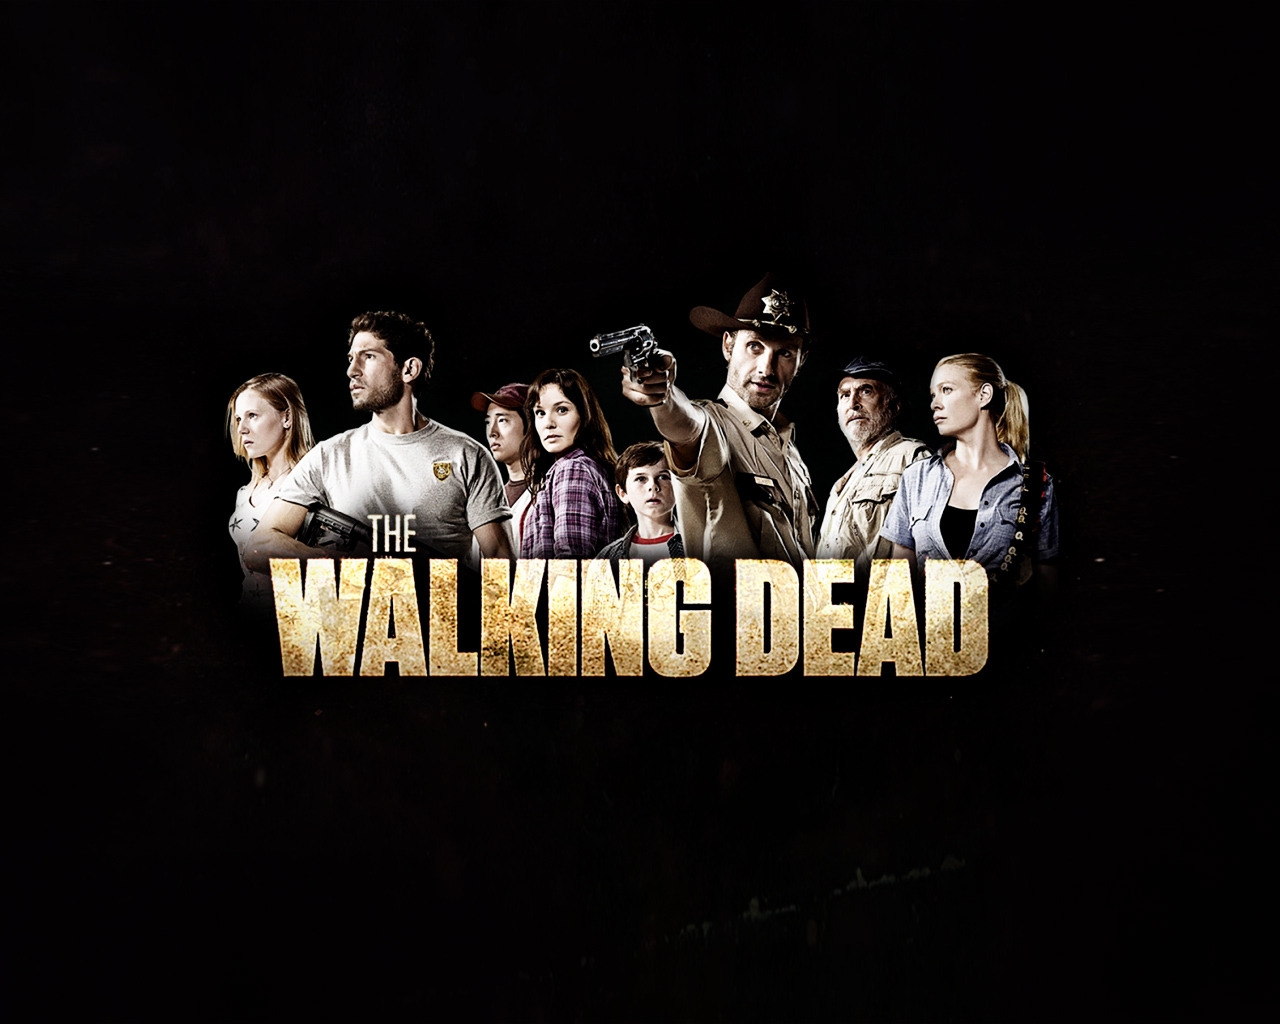 The Walking Dead Poster for 1280 x 1024 resolution